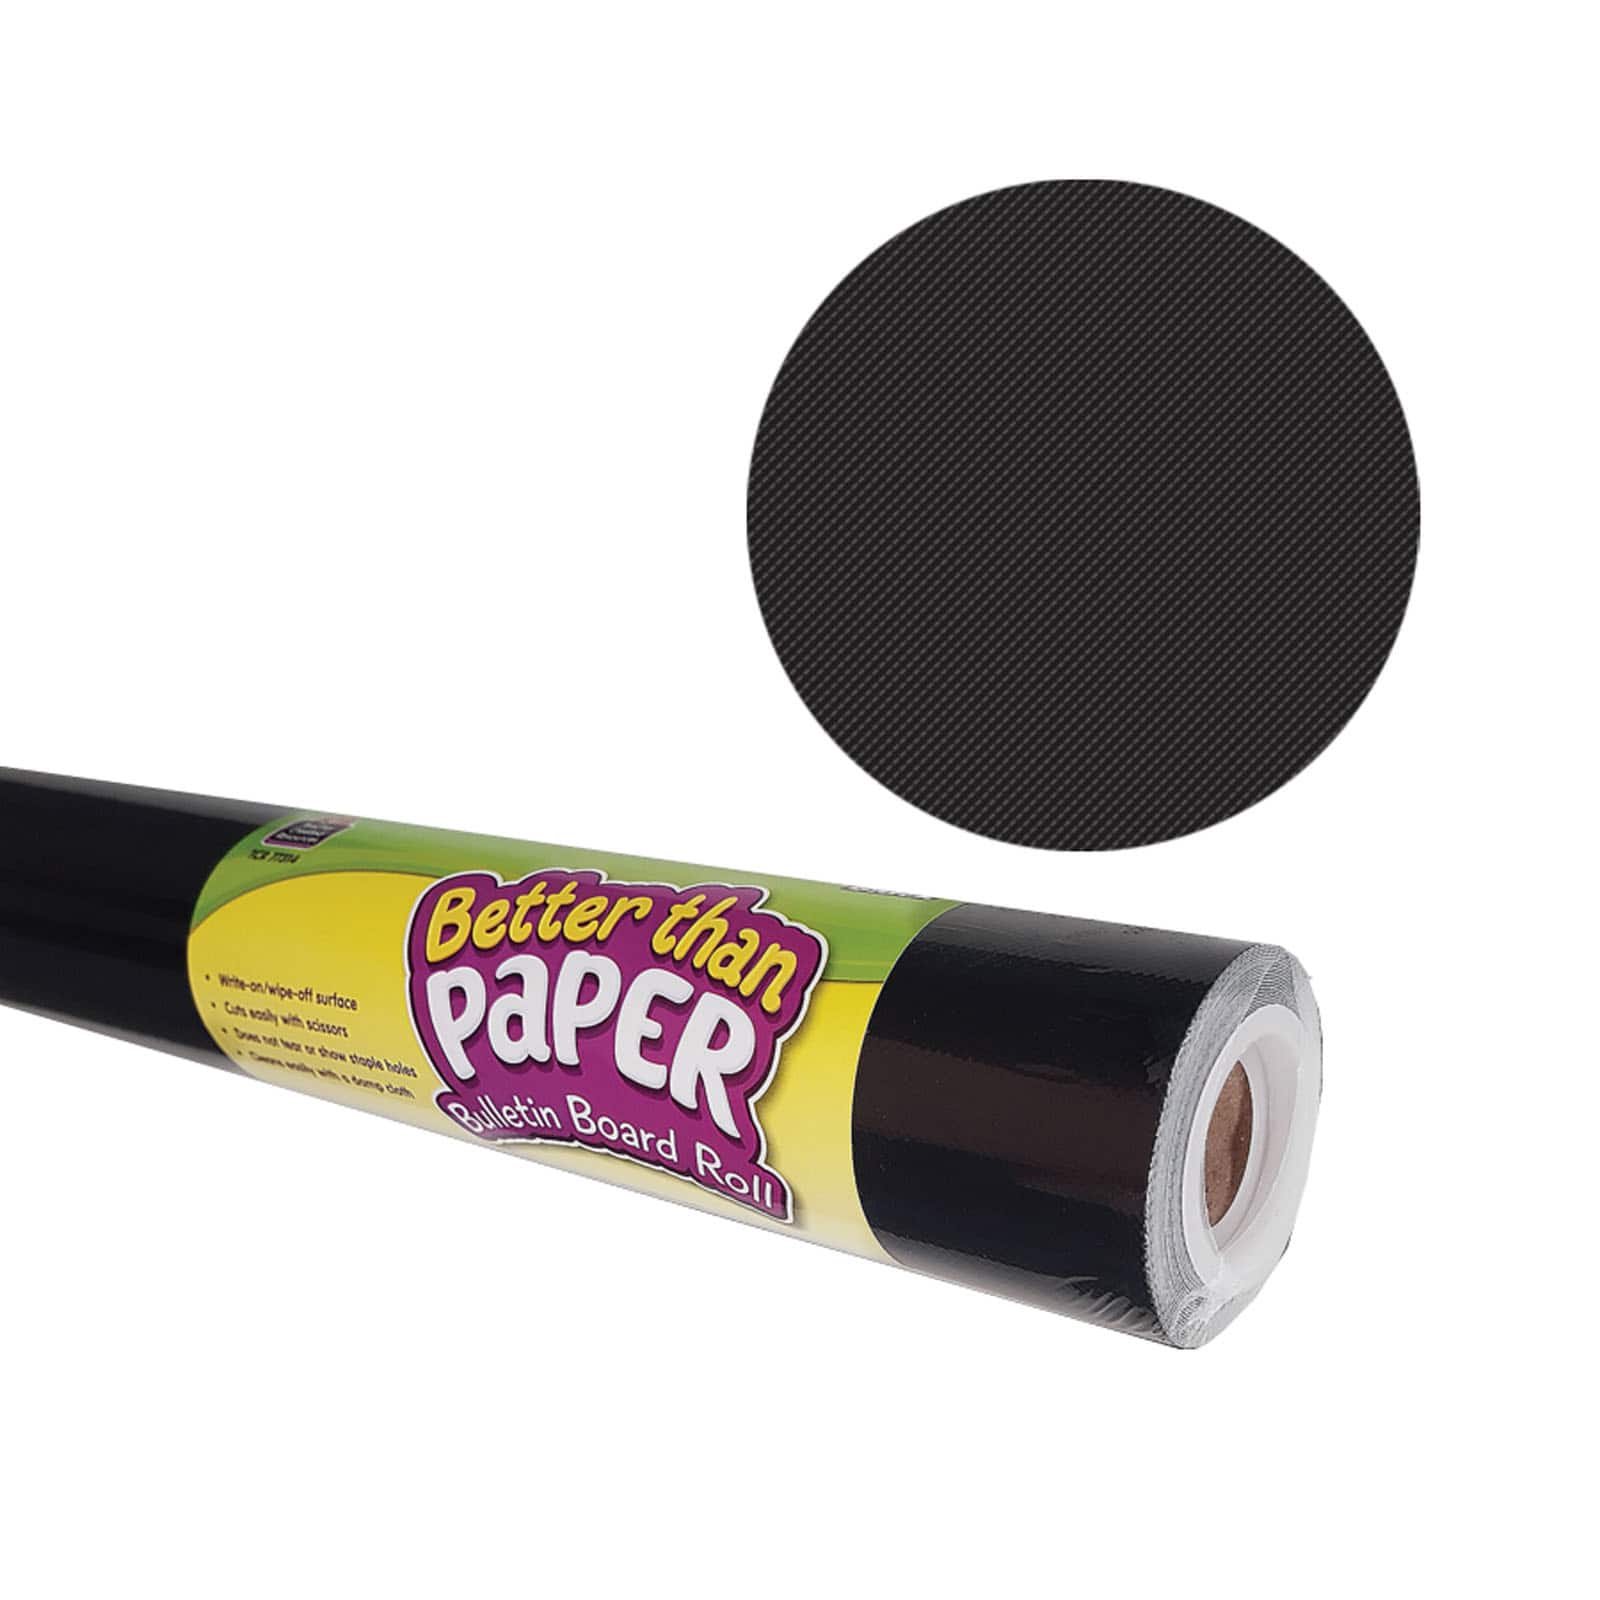 Teacher Created Resources Better Than Paper Bulletin Board Roll, Light Mauve - Pack of 4